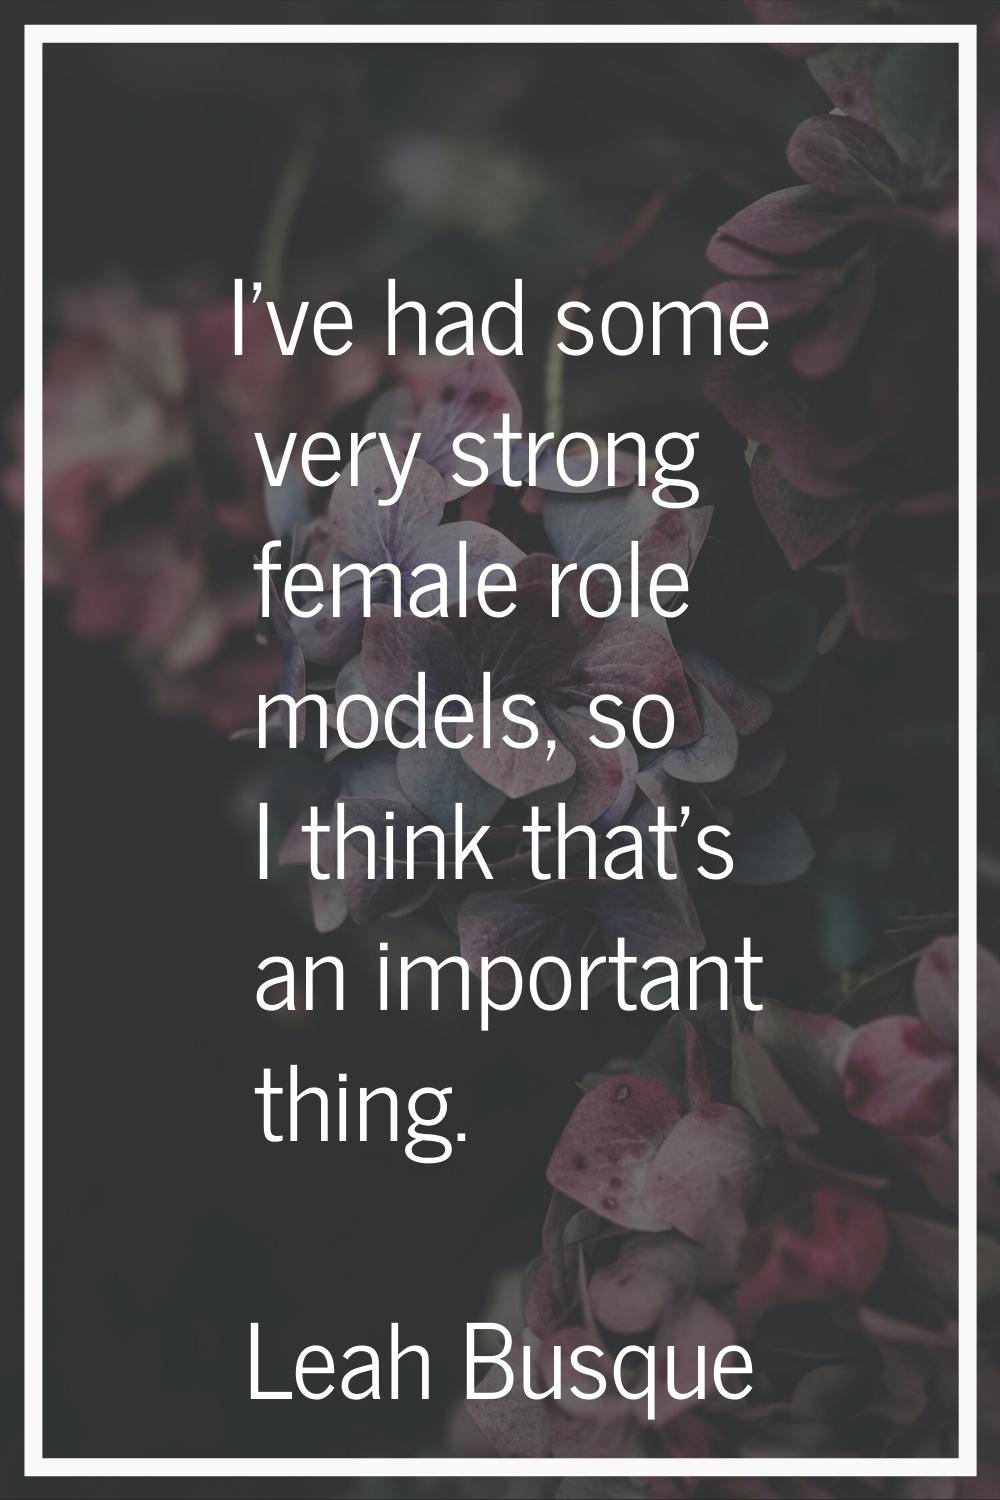 I've had some very strong female role models, so I think that's an important thing.